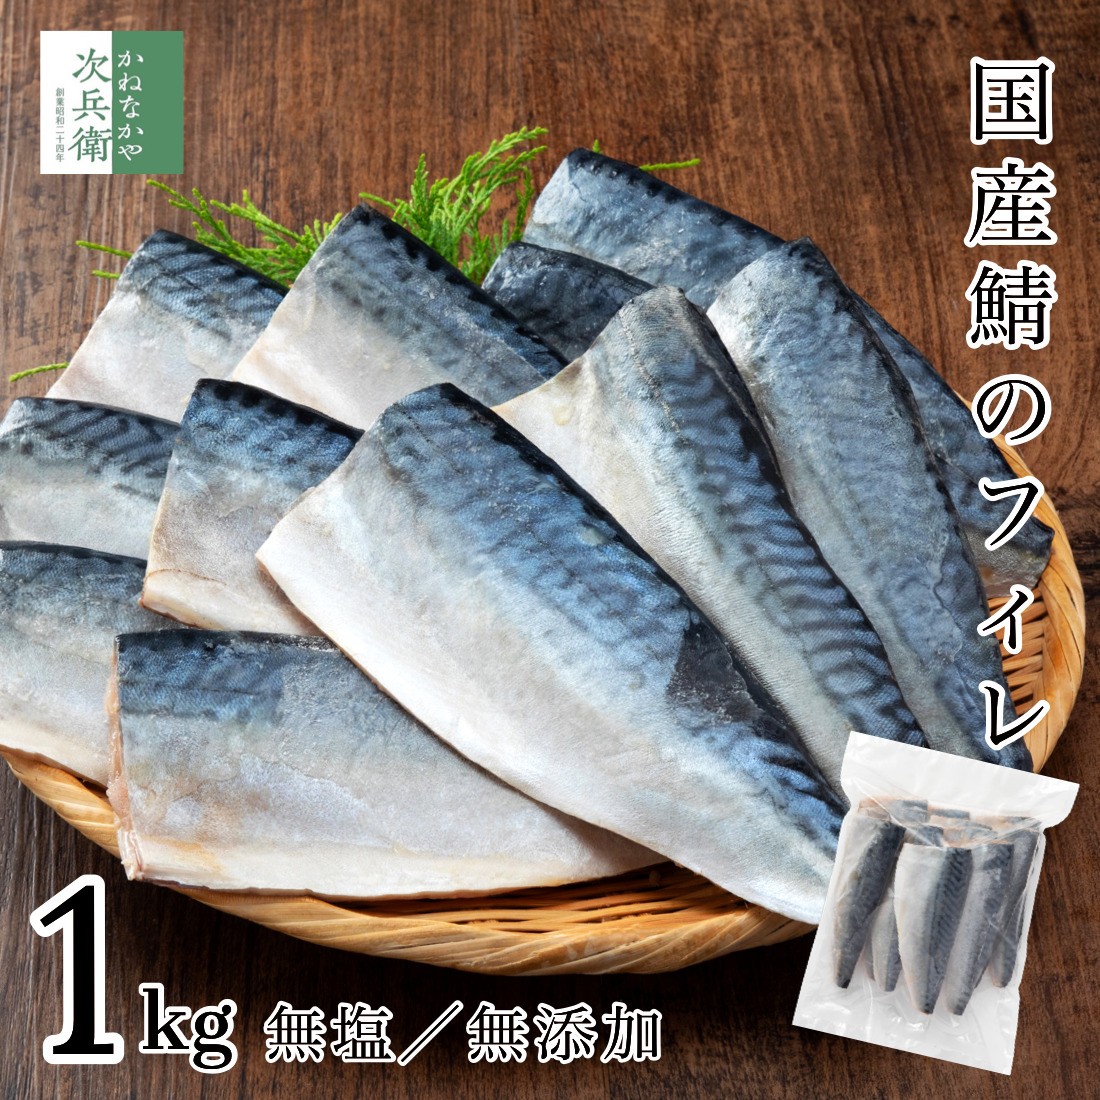  no addition domestic production natural salt free ... cut ..1kg( approximately 10-12 cut go in ) fish . taking .. none salt none freezing 1 cut approximately 80g~100g. meal . respondent . is good . pulling out domestic processing heating for [C delivery : freezing ]